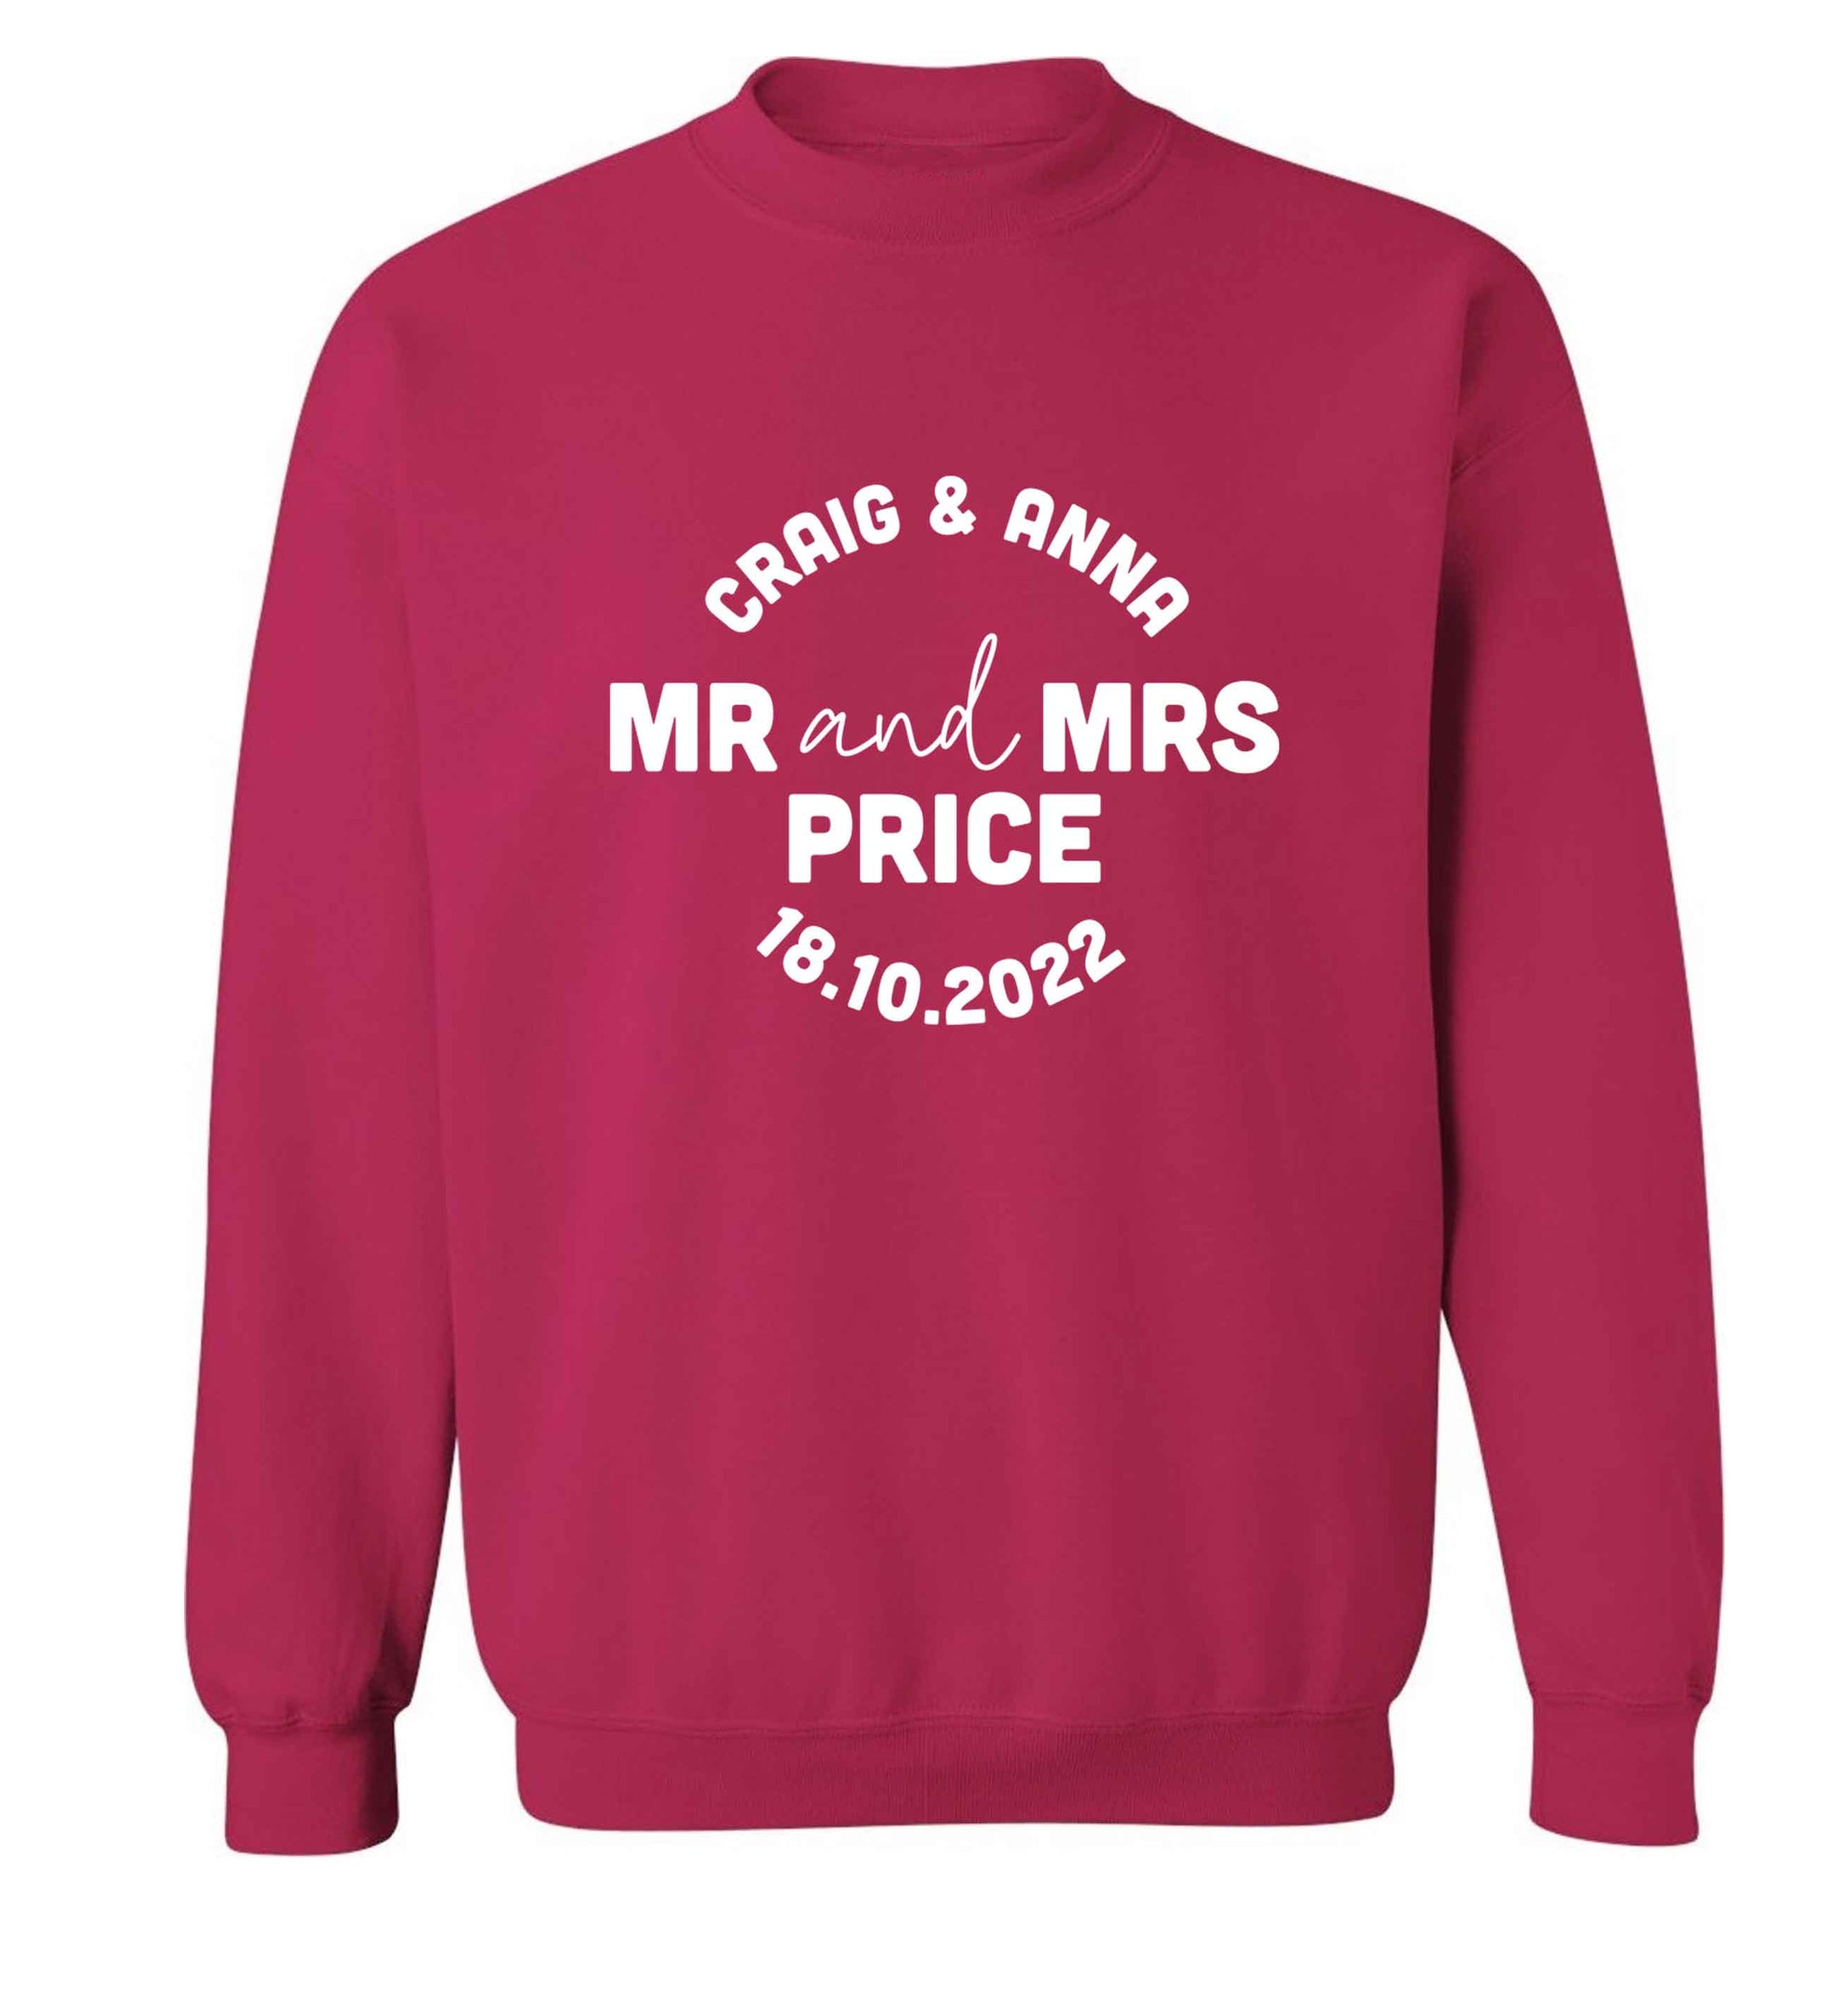 Personalised Mr and Mrs wedding and date! Ideal wedding favours! adult's unisex pink sweater 2XL